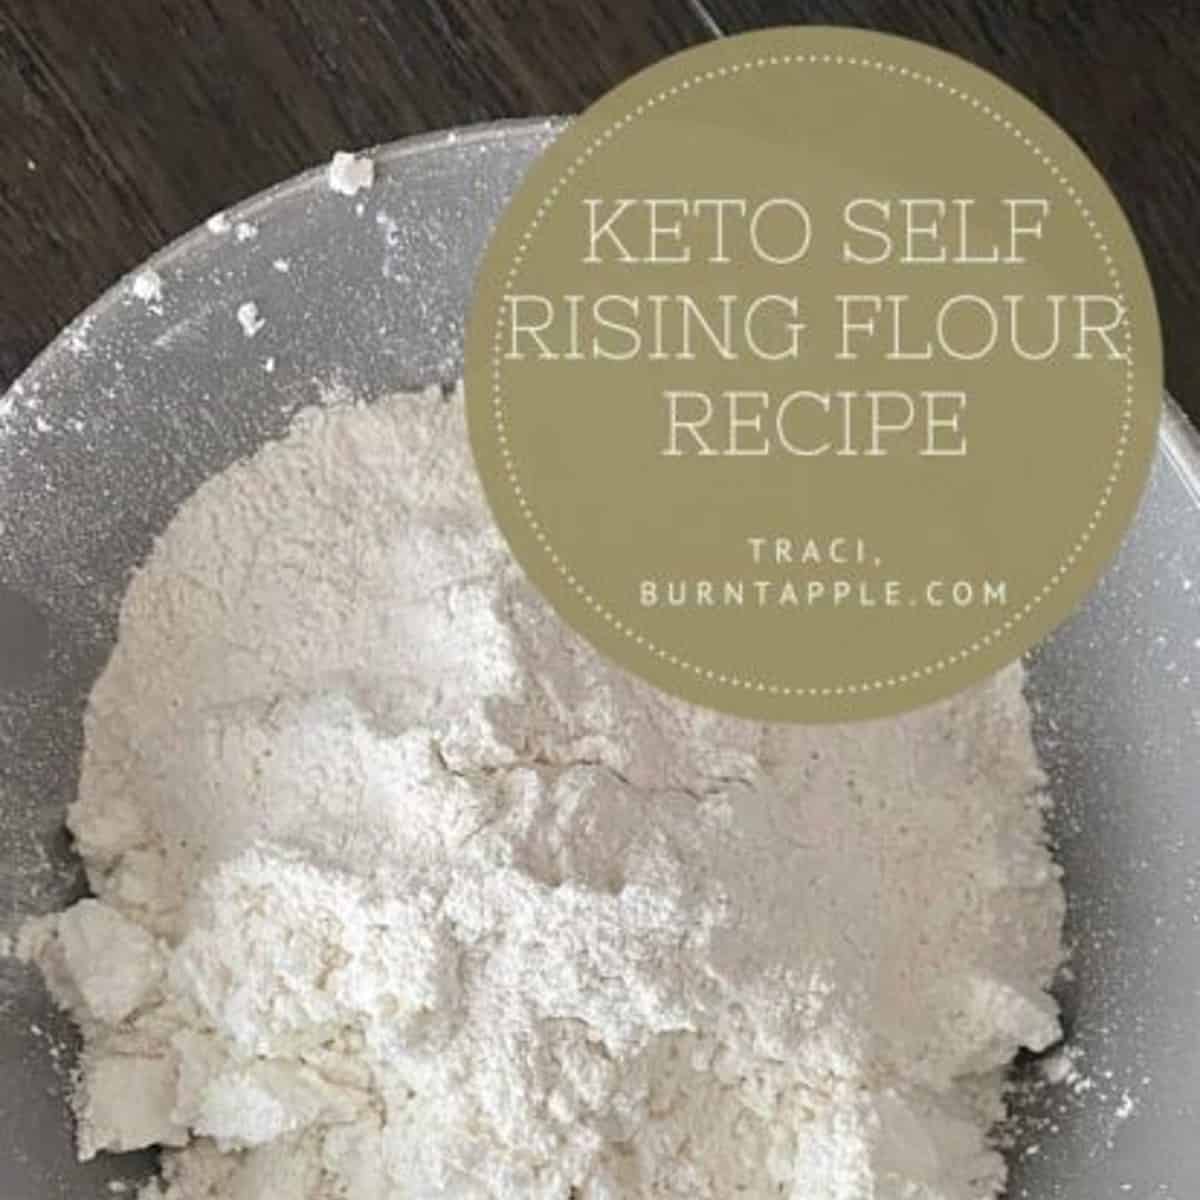 A photo of a white ceramic bowl filled with a pale yellow flour mixture. The words "Keto Self Rising Flour Recipe" are written in black lettering above the bowl on a brown background.